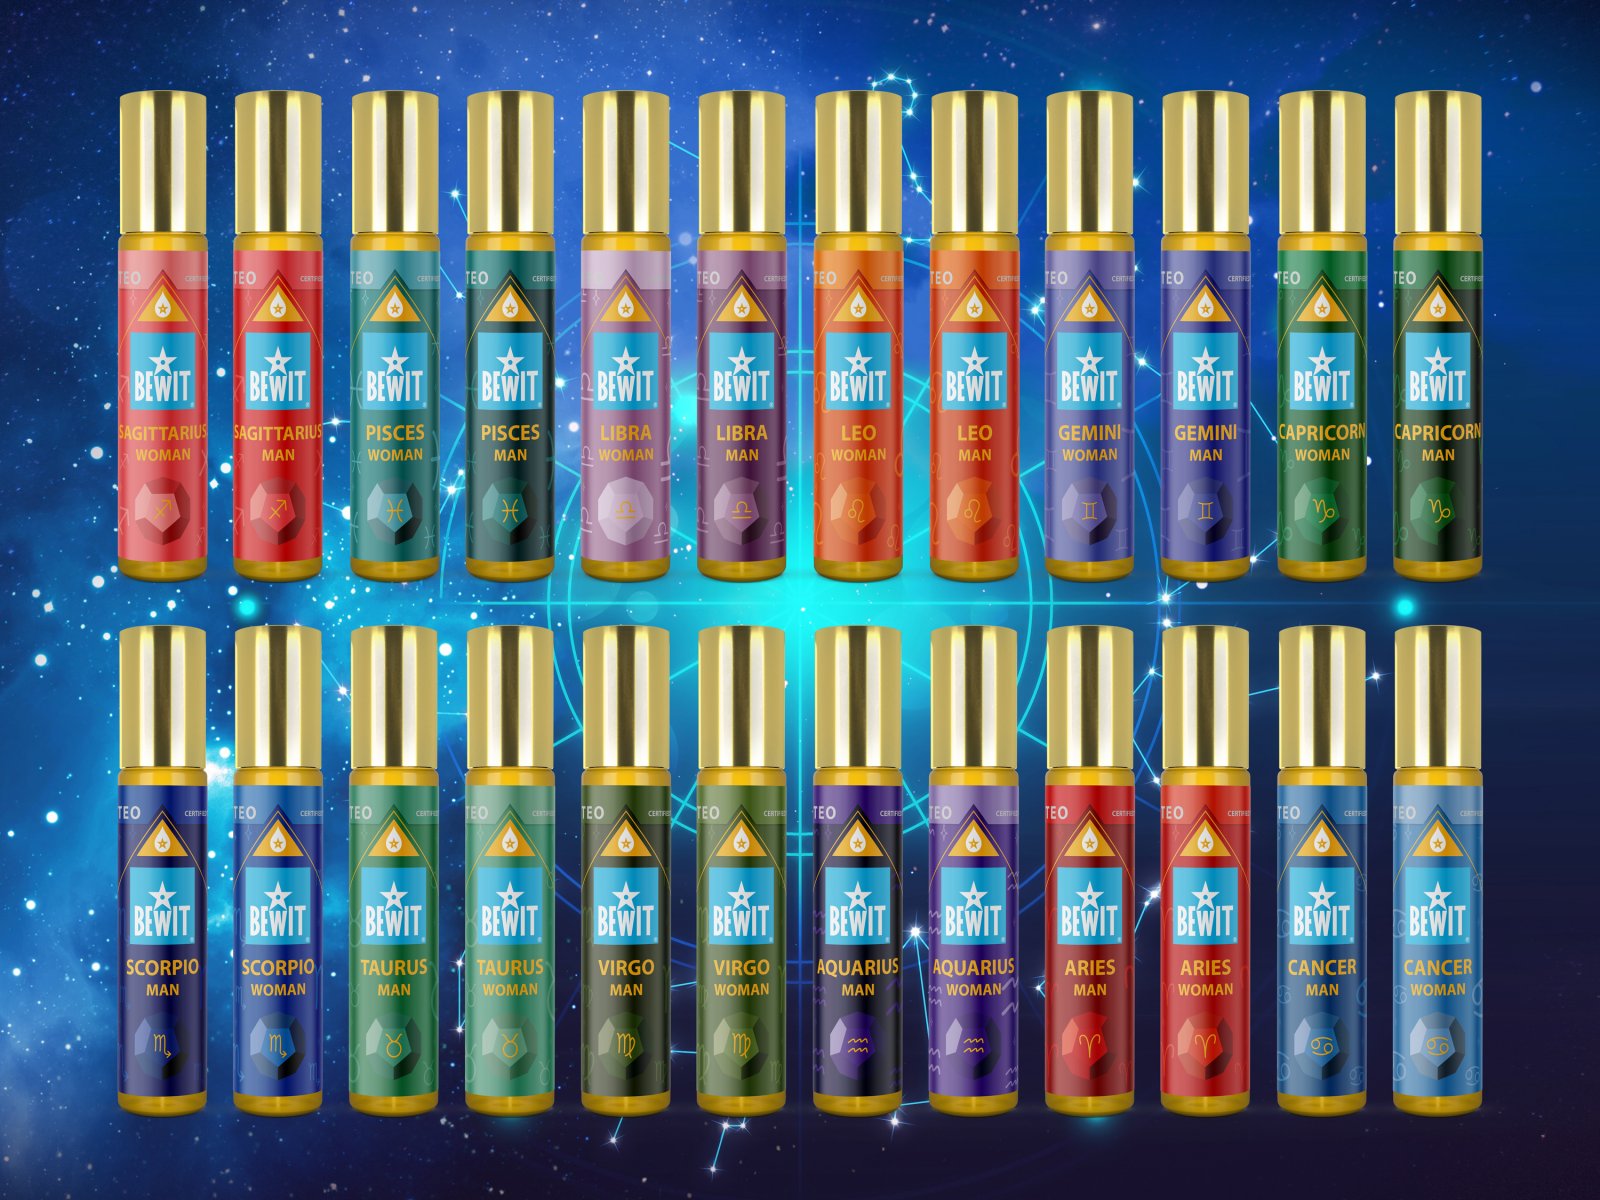 BEWIT® Zodiac Sign Set - 24 roll-on oil perfumes - 1